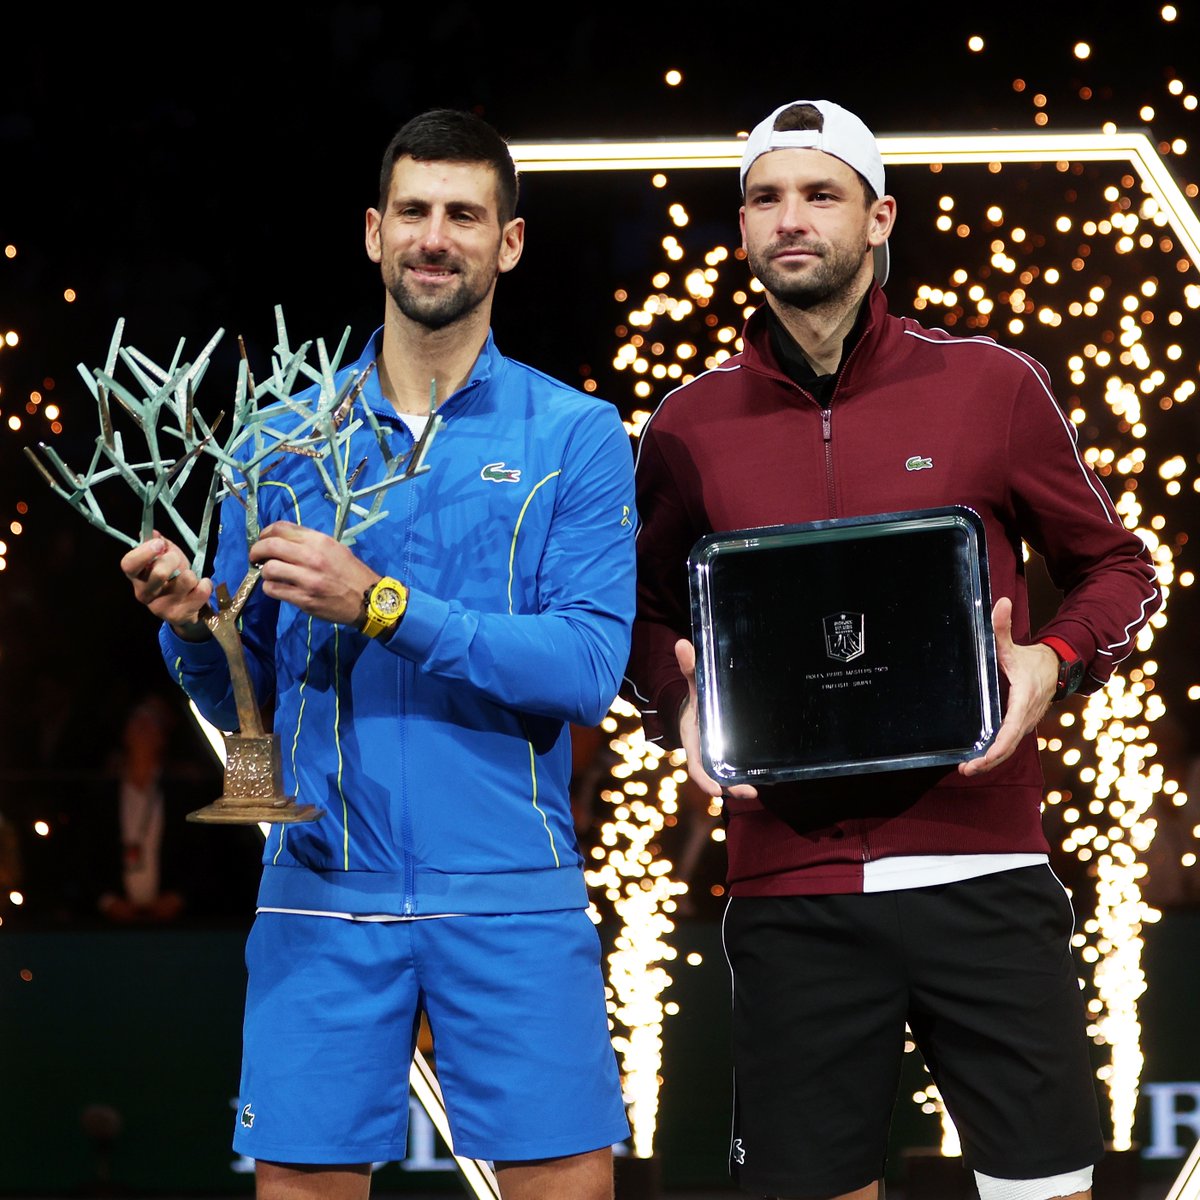 A phenomenal week for them both! 👏

@RolexPMasters | #RolexParisMasters